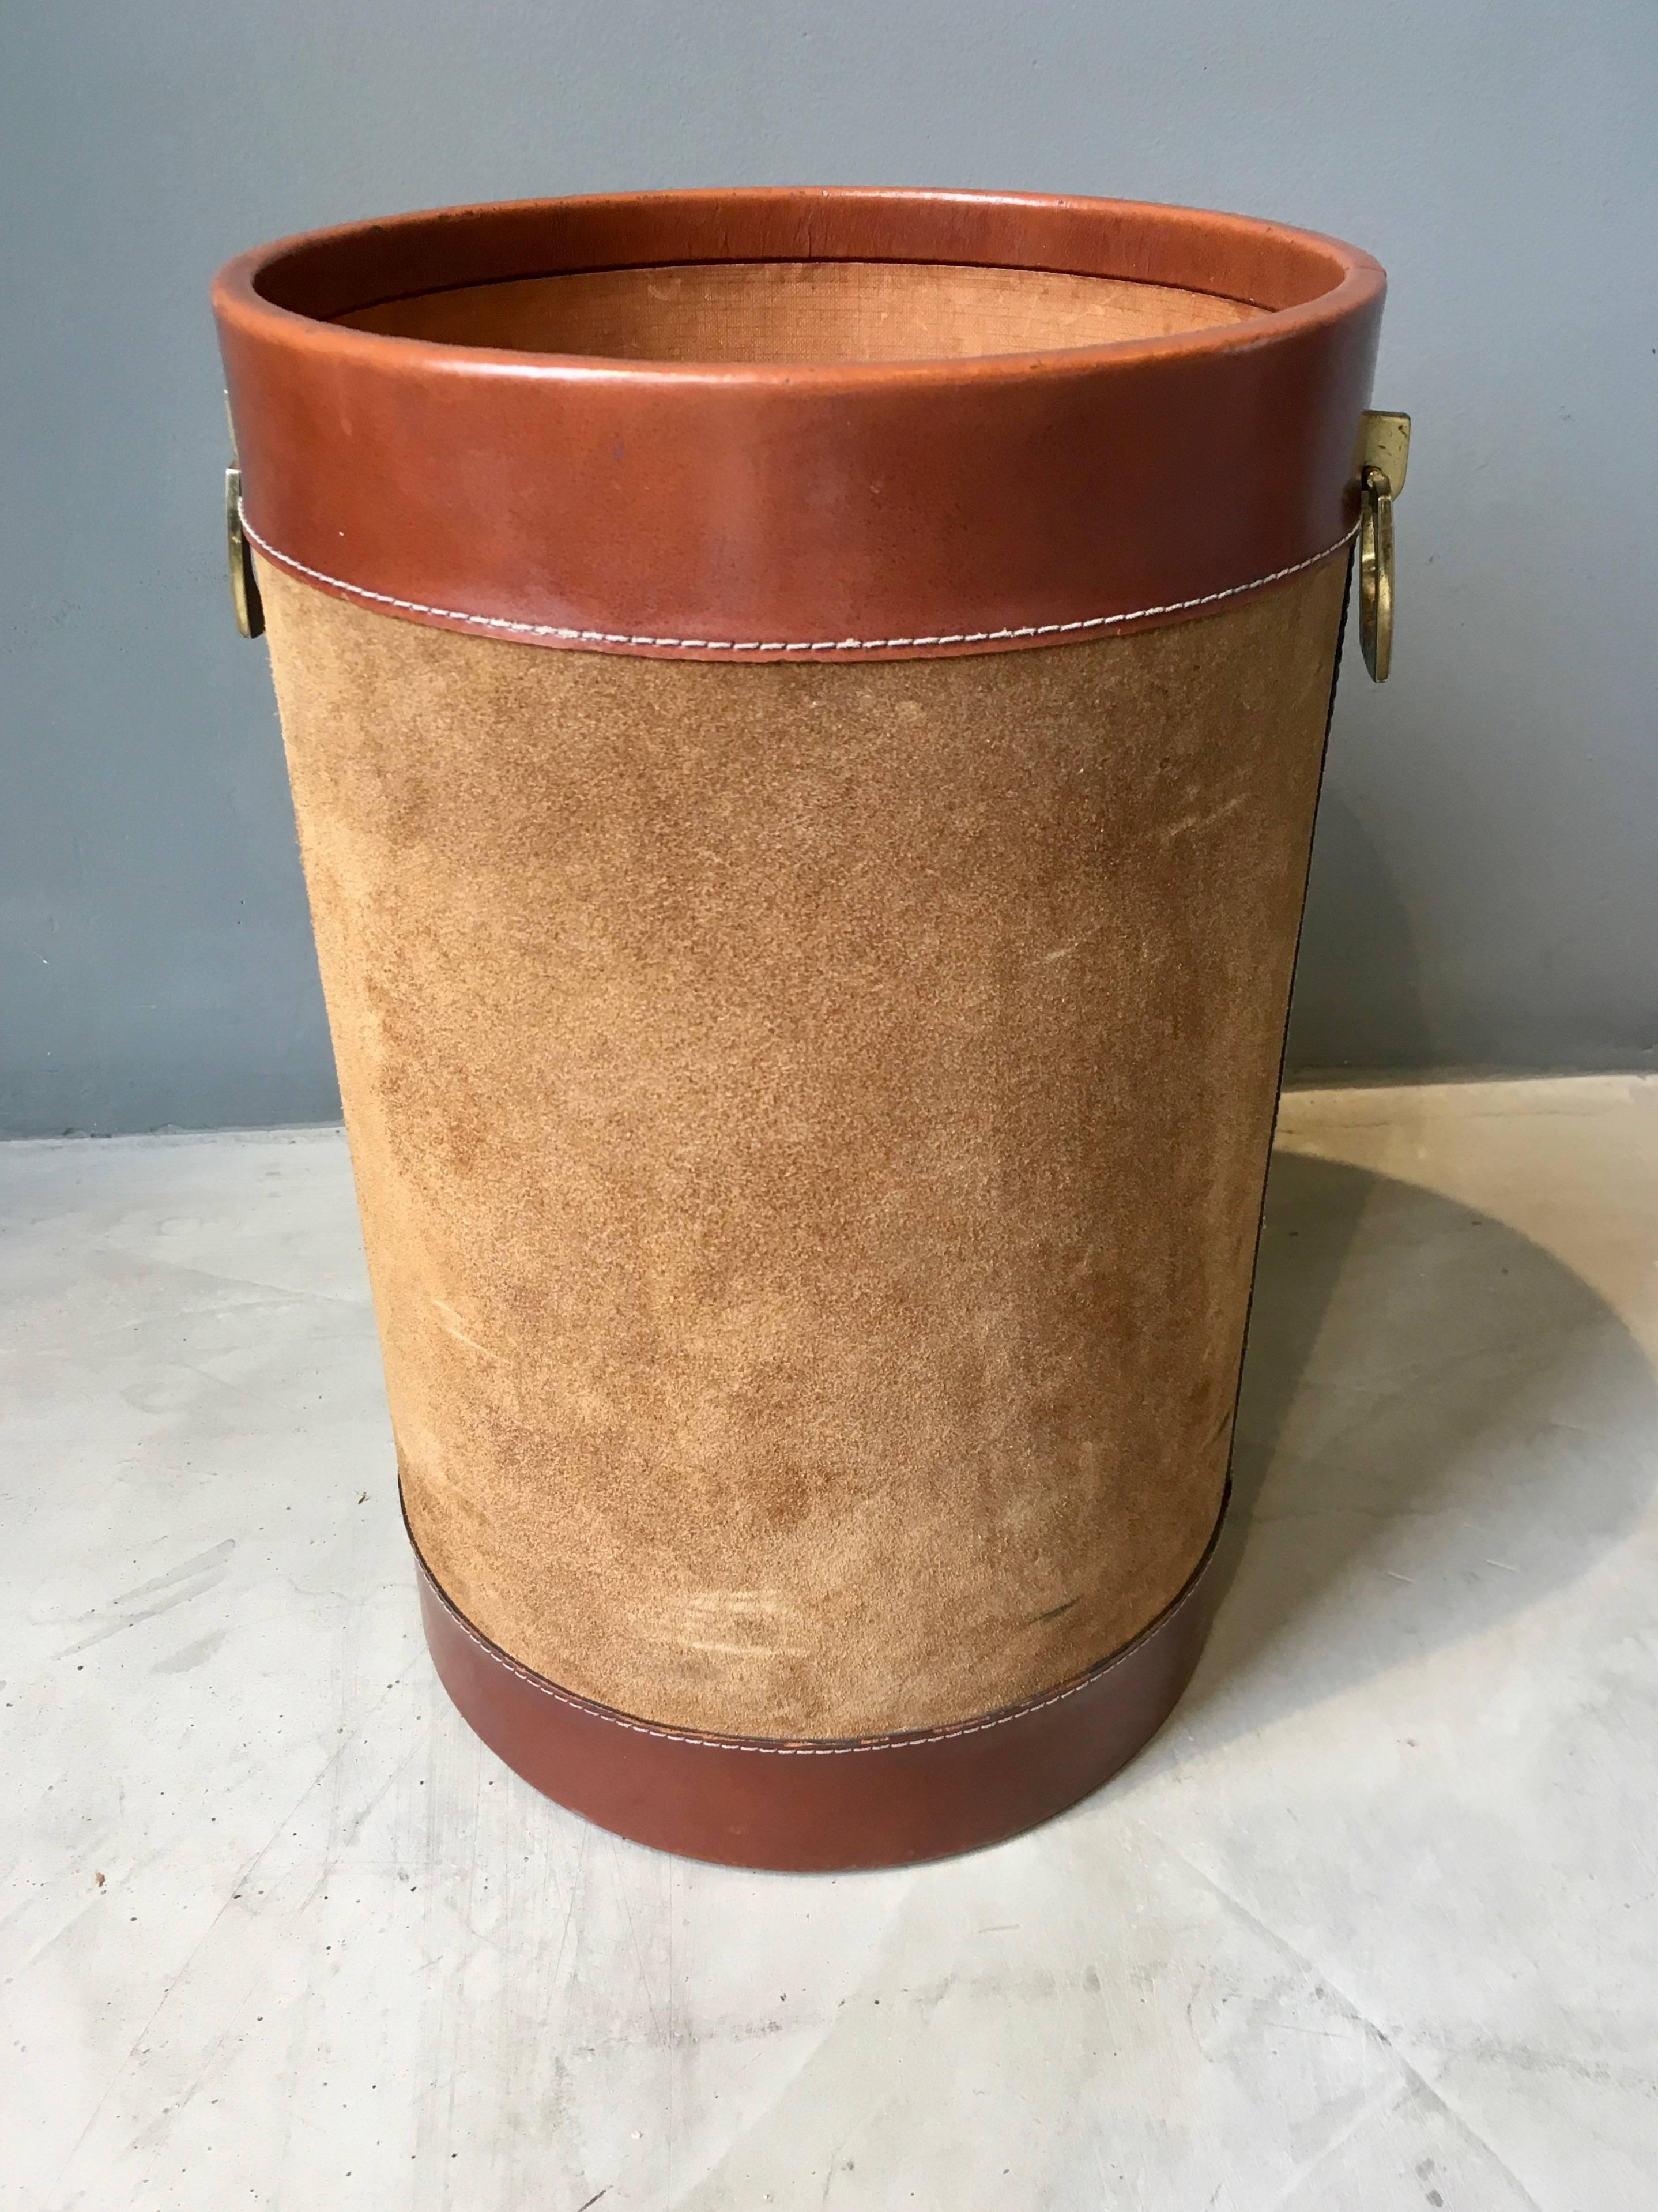 Handsome leather and suede bin in the style of Jacques Adnet. Brass buckles on each side. Gorgeous patina to leather and suede. Fantastic piece!